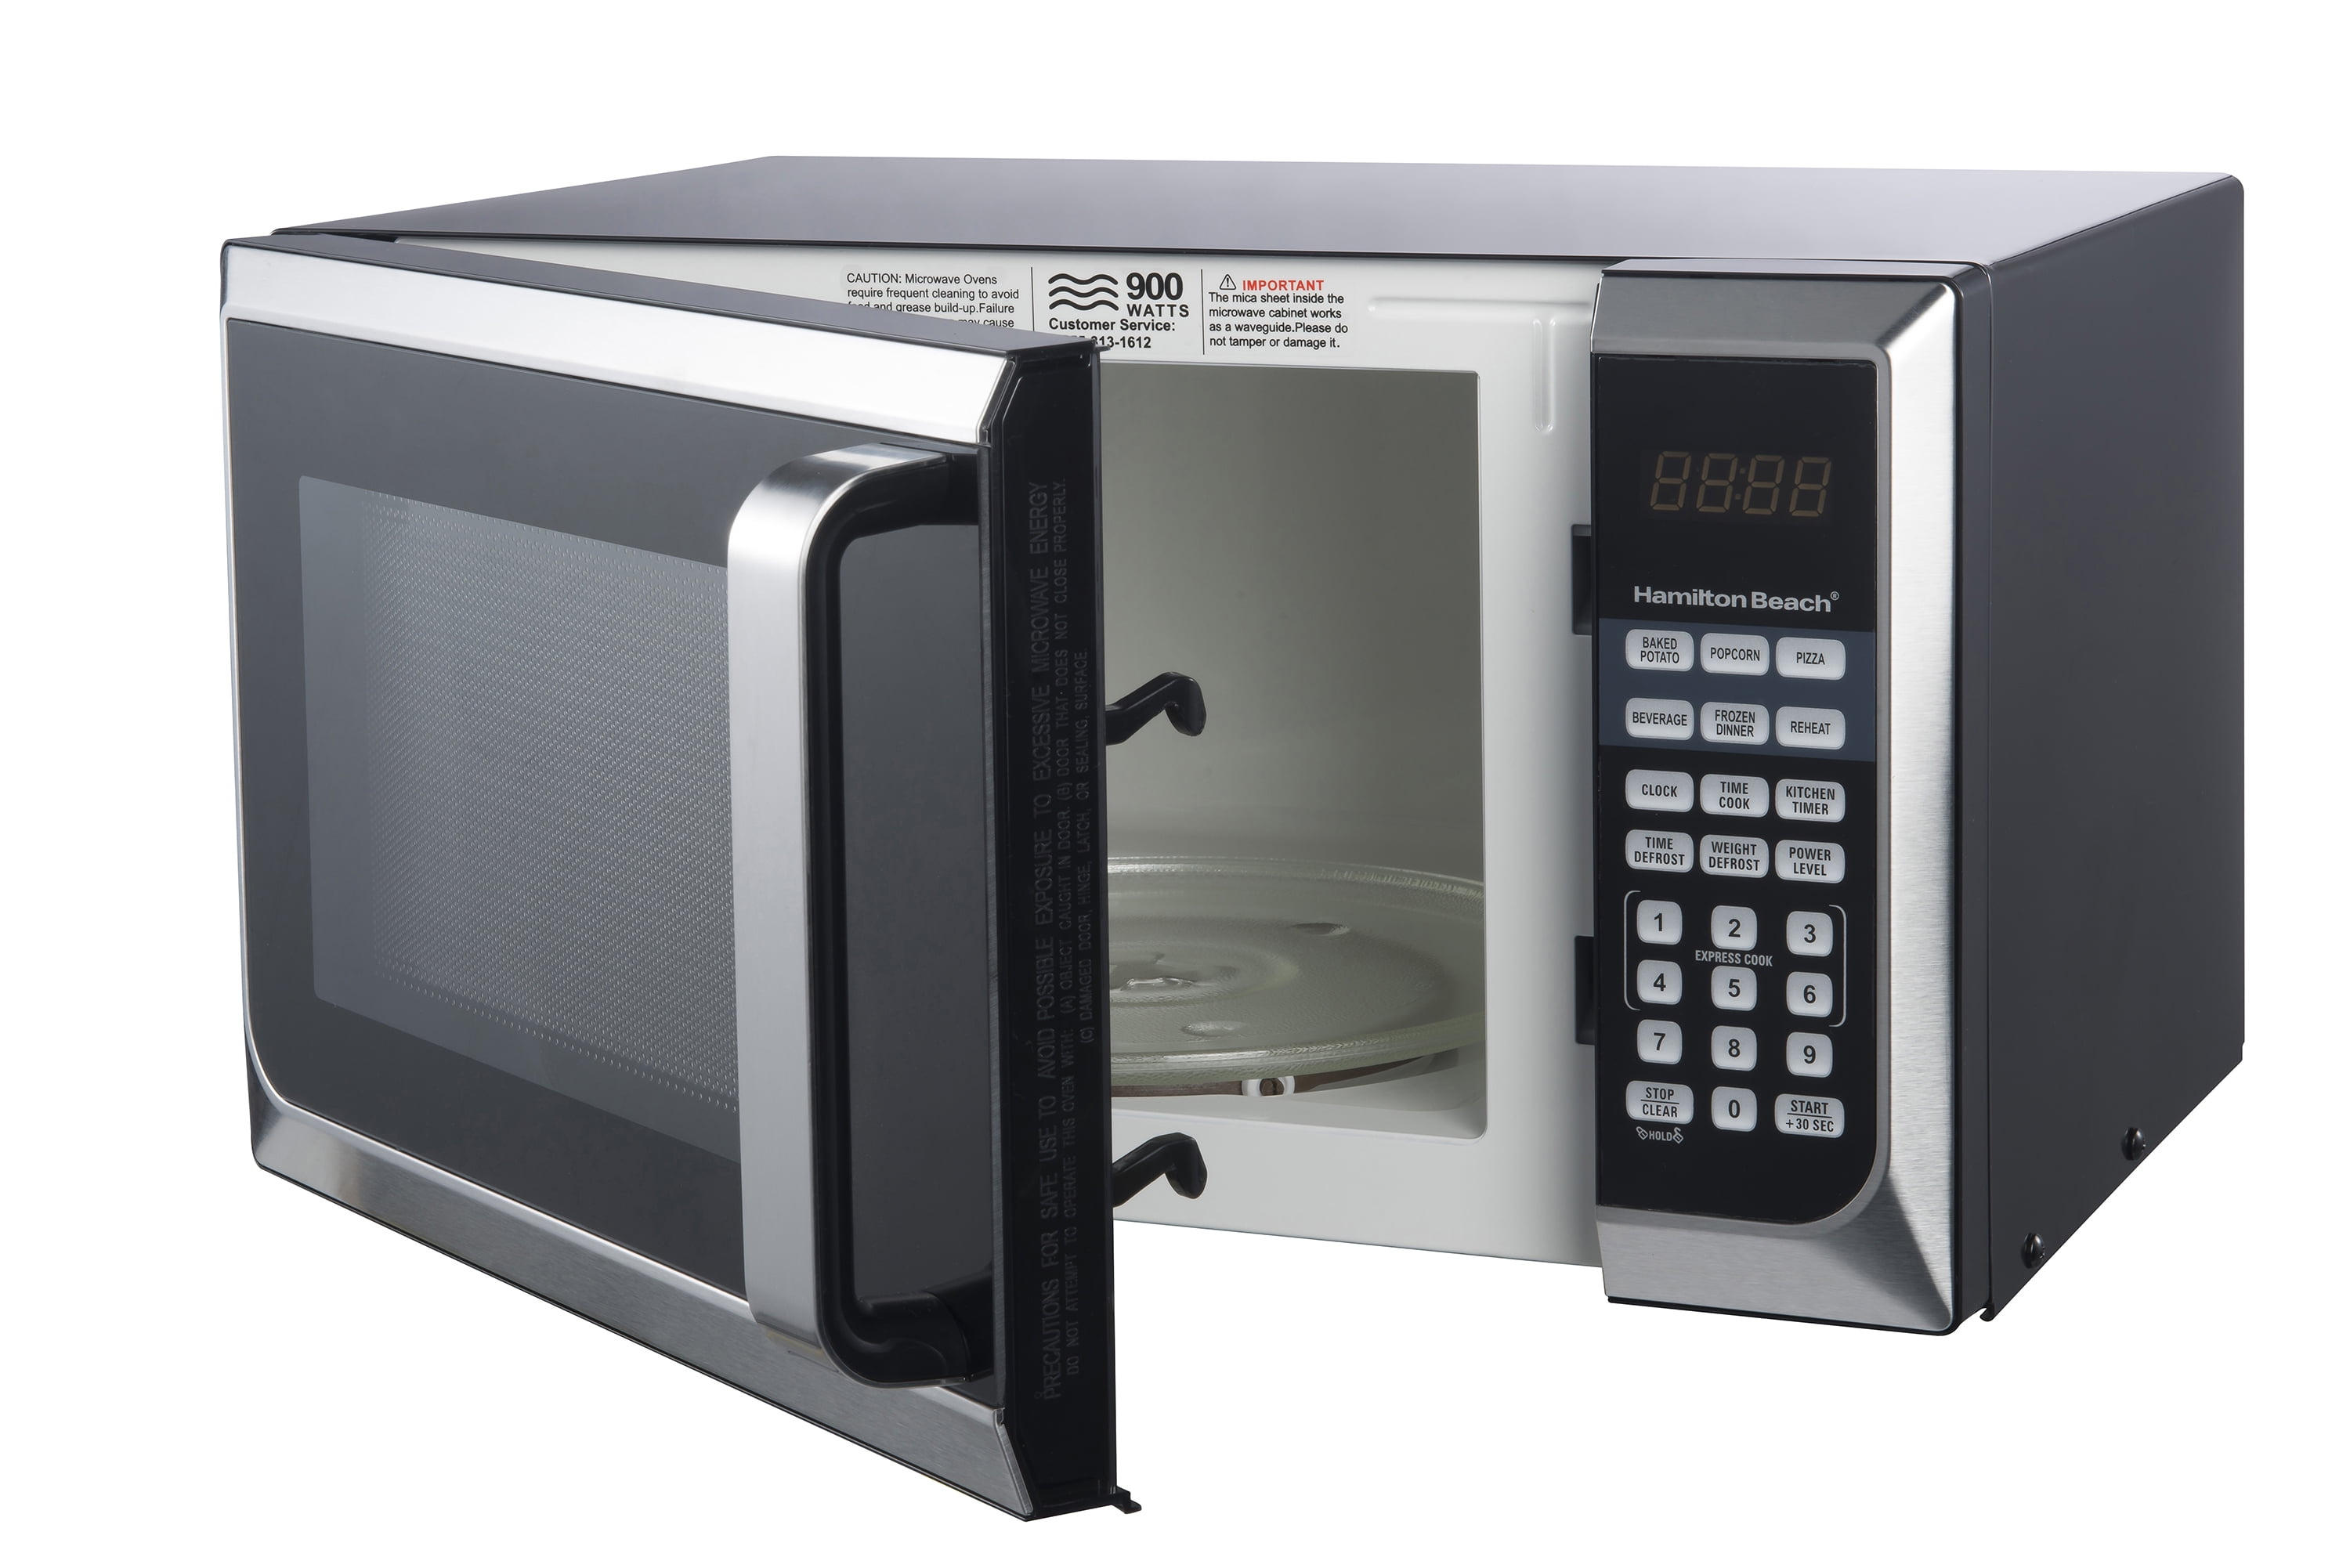 Stainless Steel Microwave Oven Dorm College Apartment 900w LED Countertop Home 